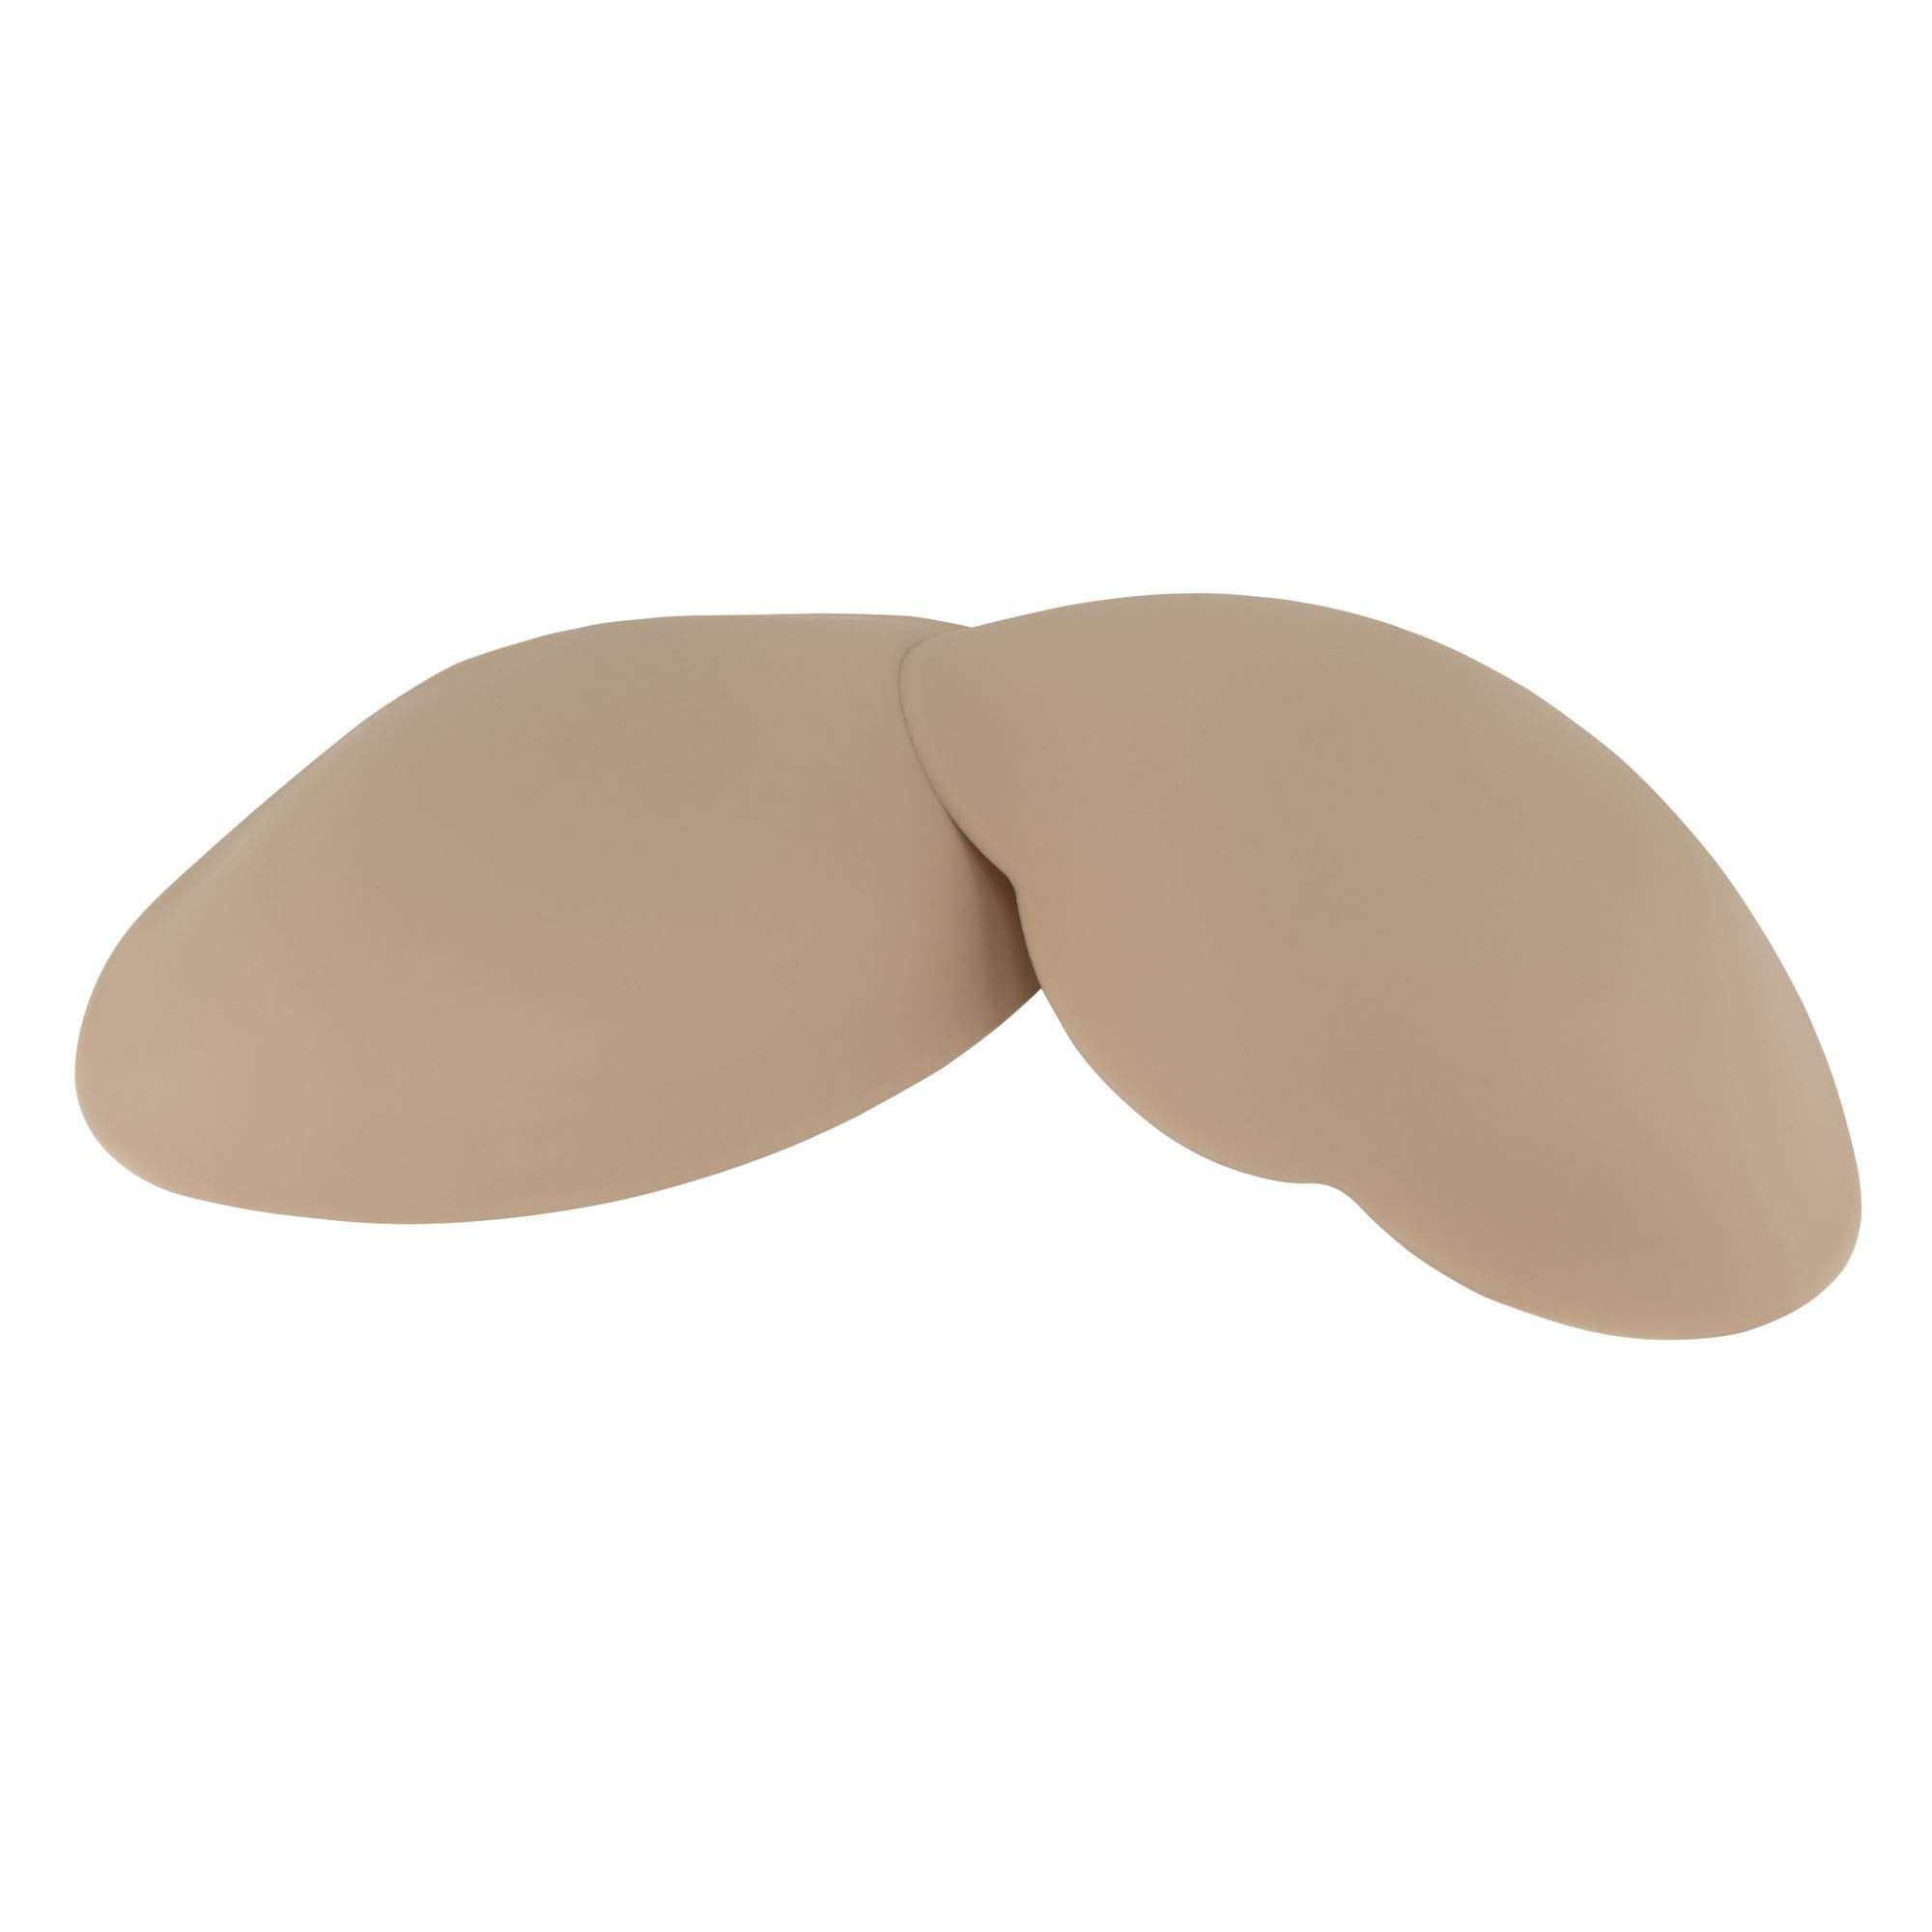 Bring It Up Womens Nude Breast Shapers Size DDD, Nude/DDD 